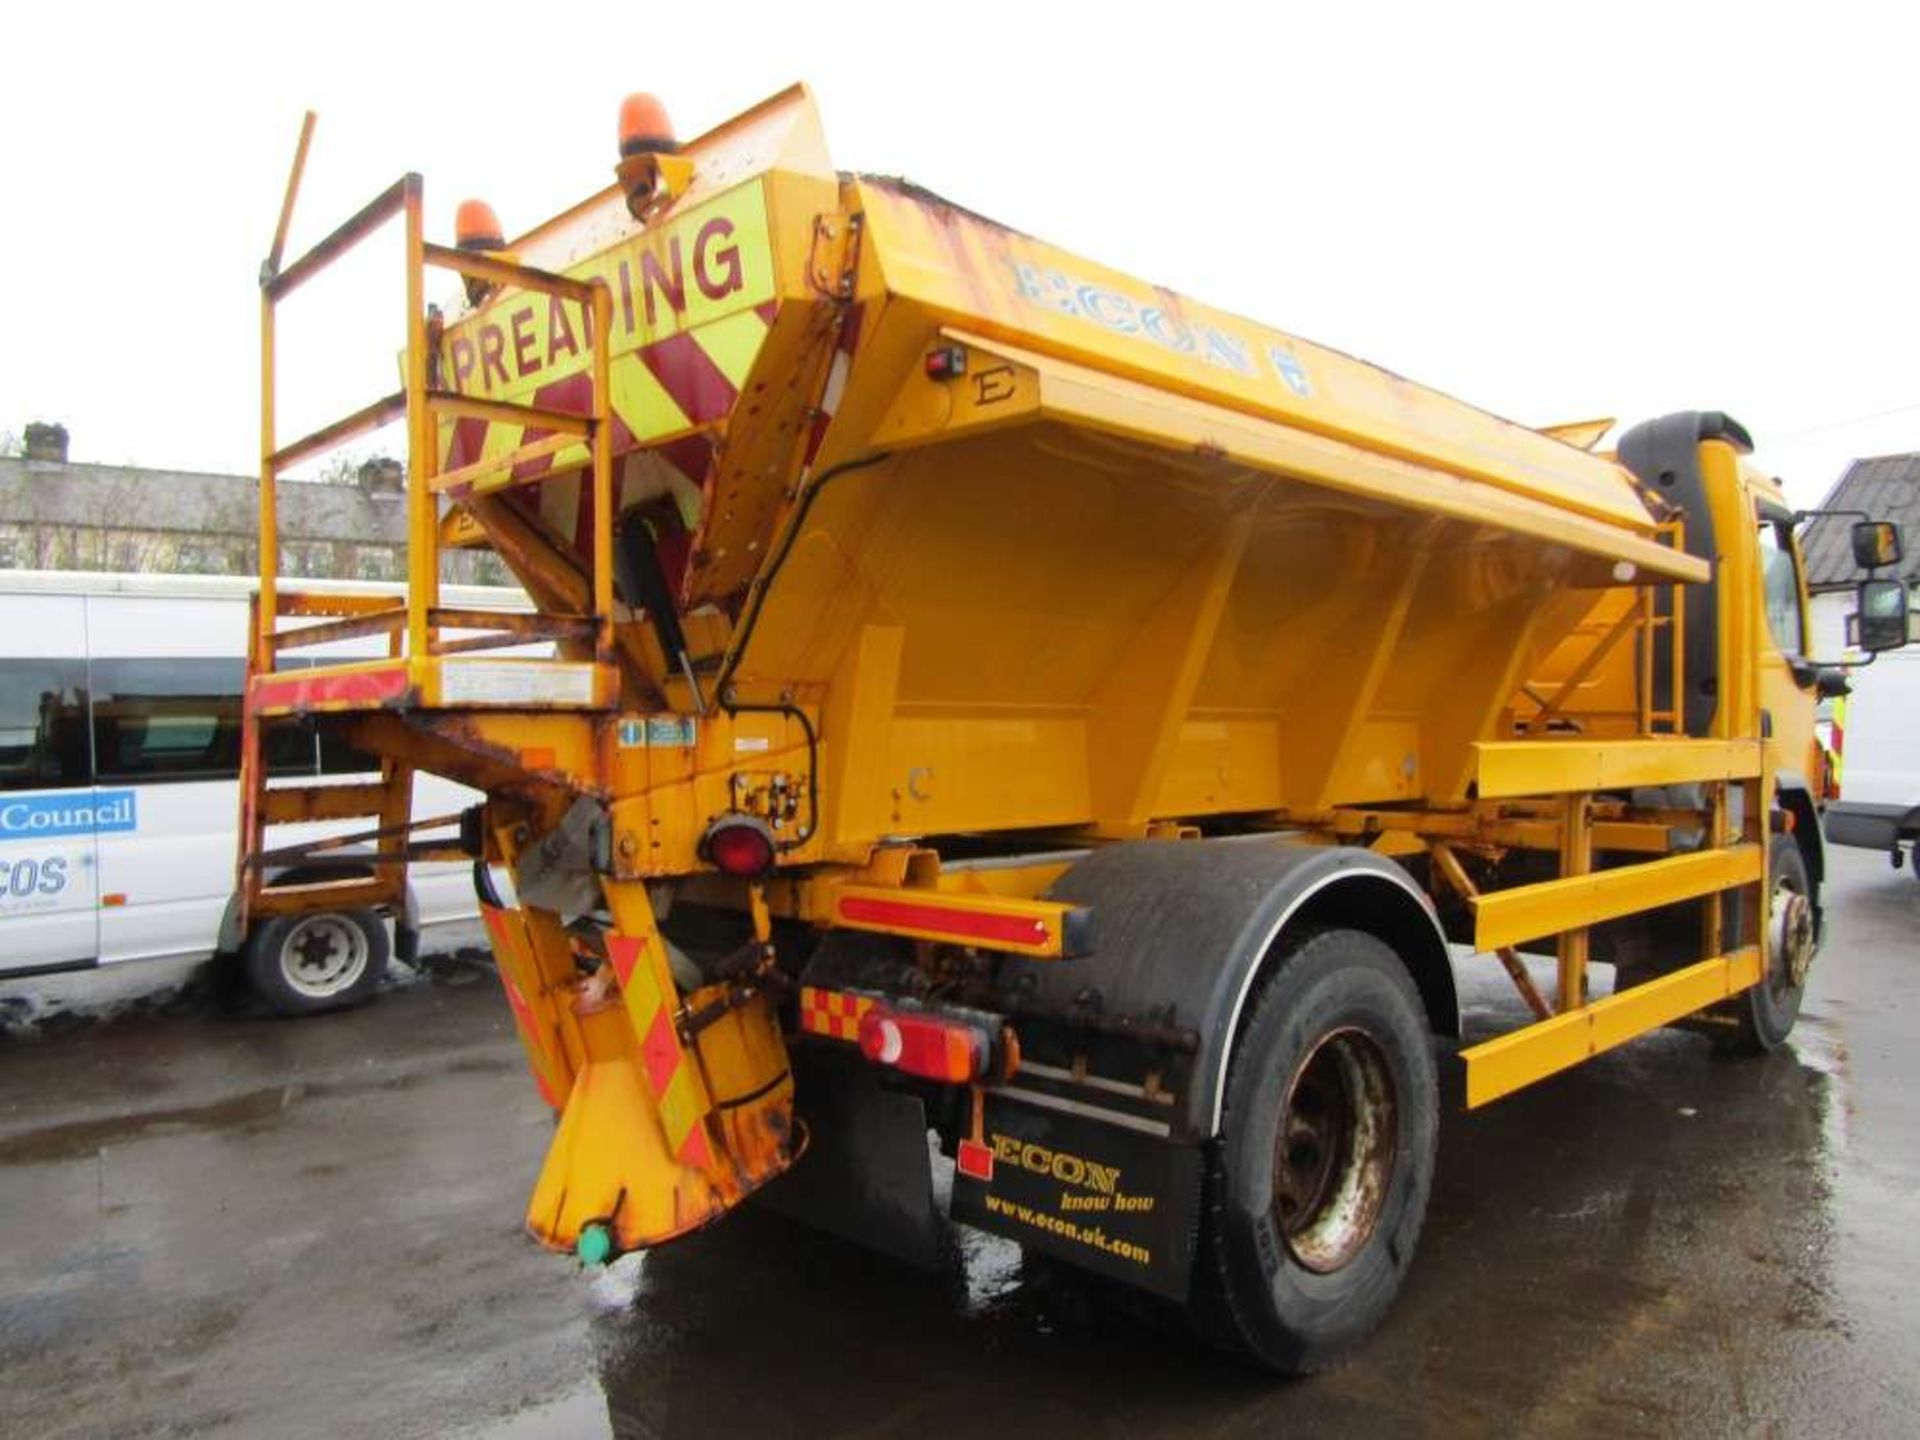 2009 09 reg Daf LF 55.220 Gritter (Direct Council) - Image 4 of 6